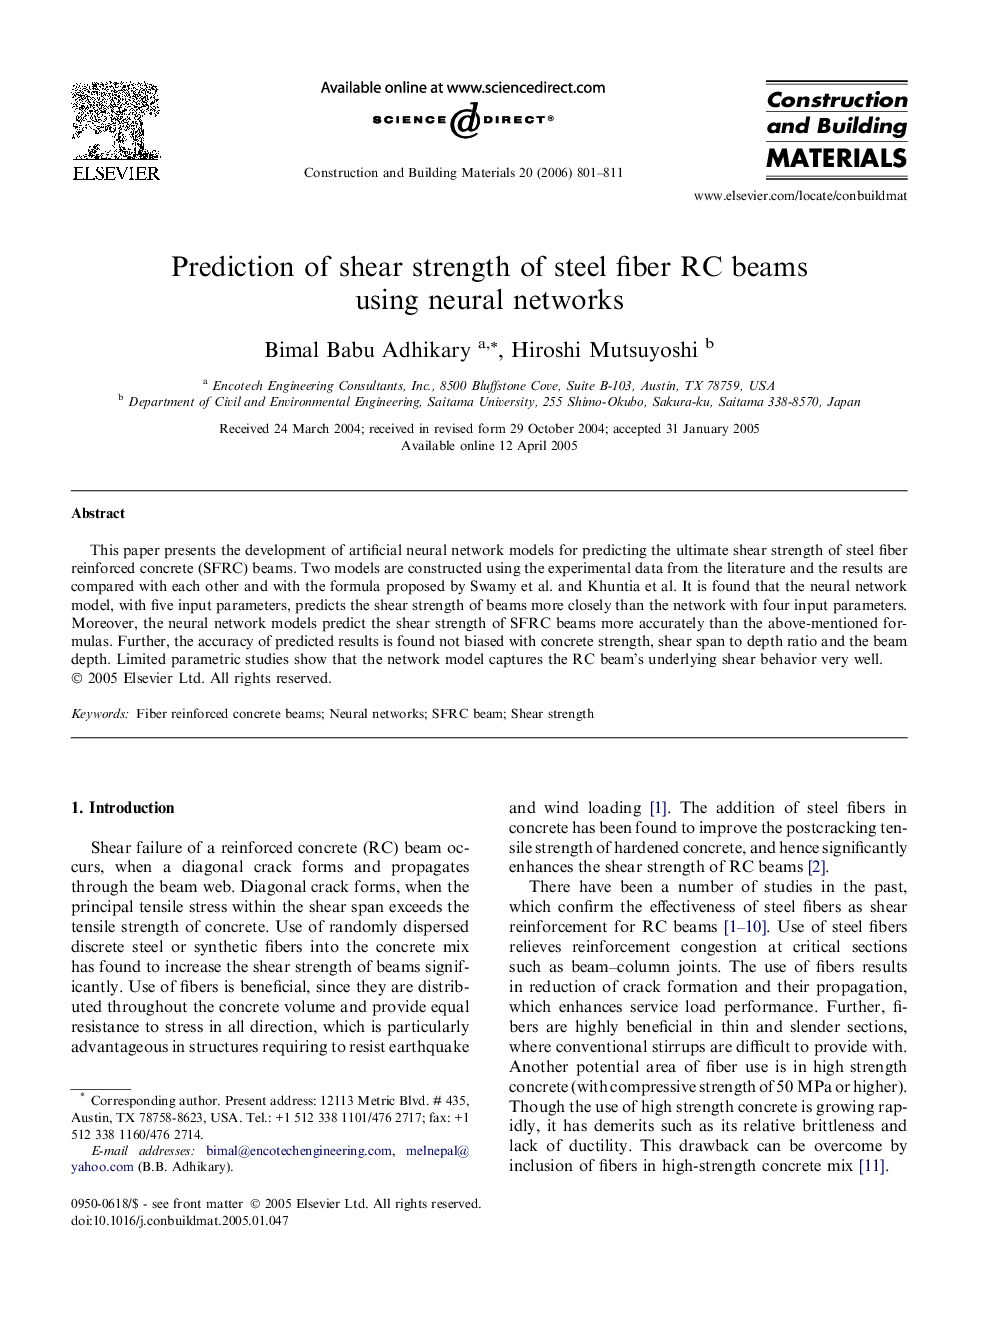 Prediction of shear strength of steel fiber RC beams using neural networks